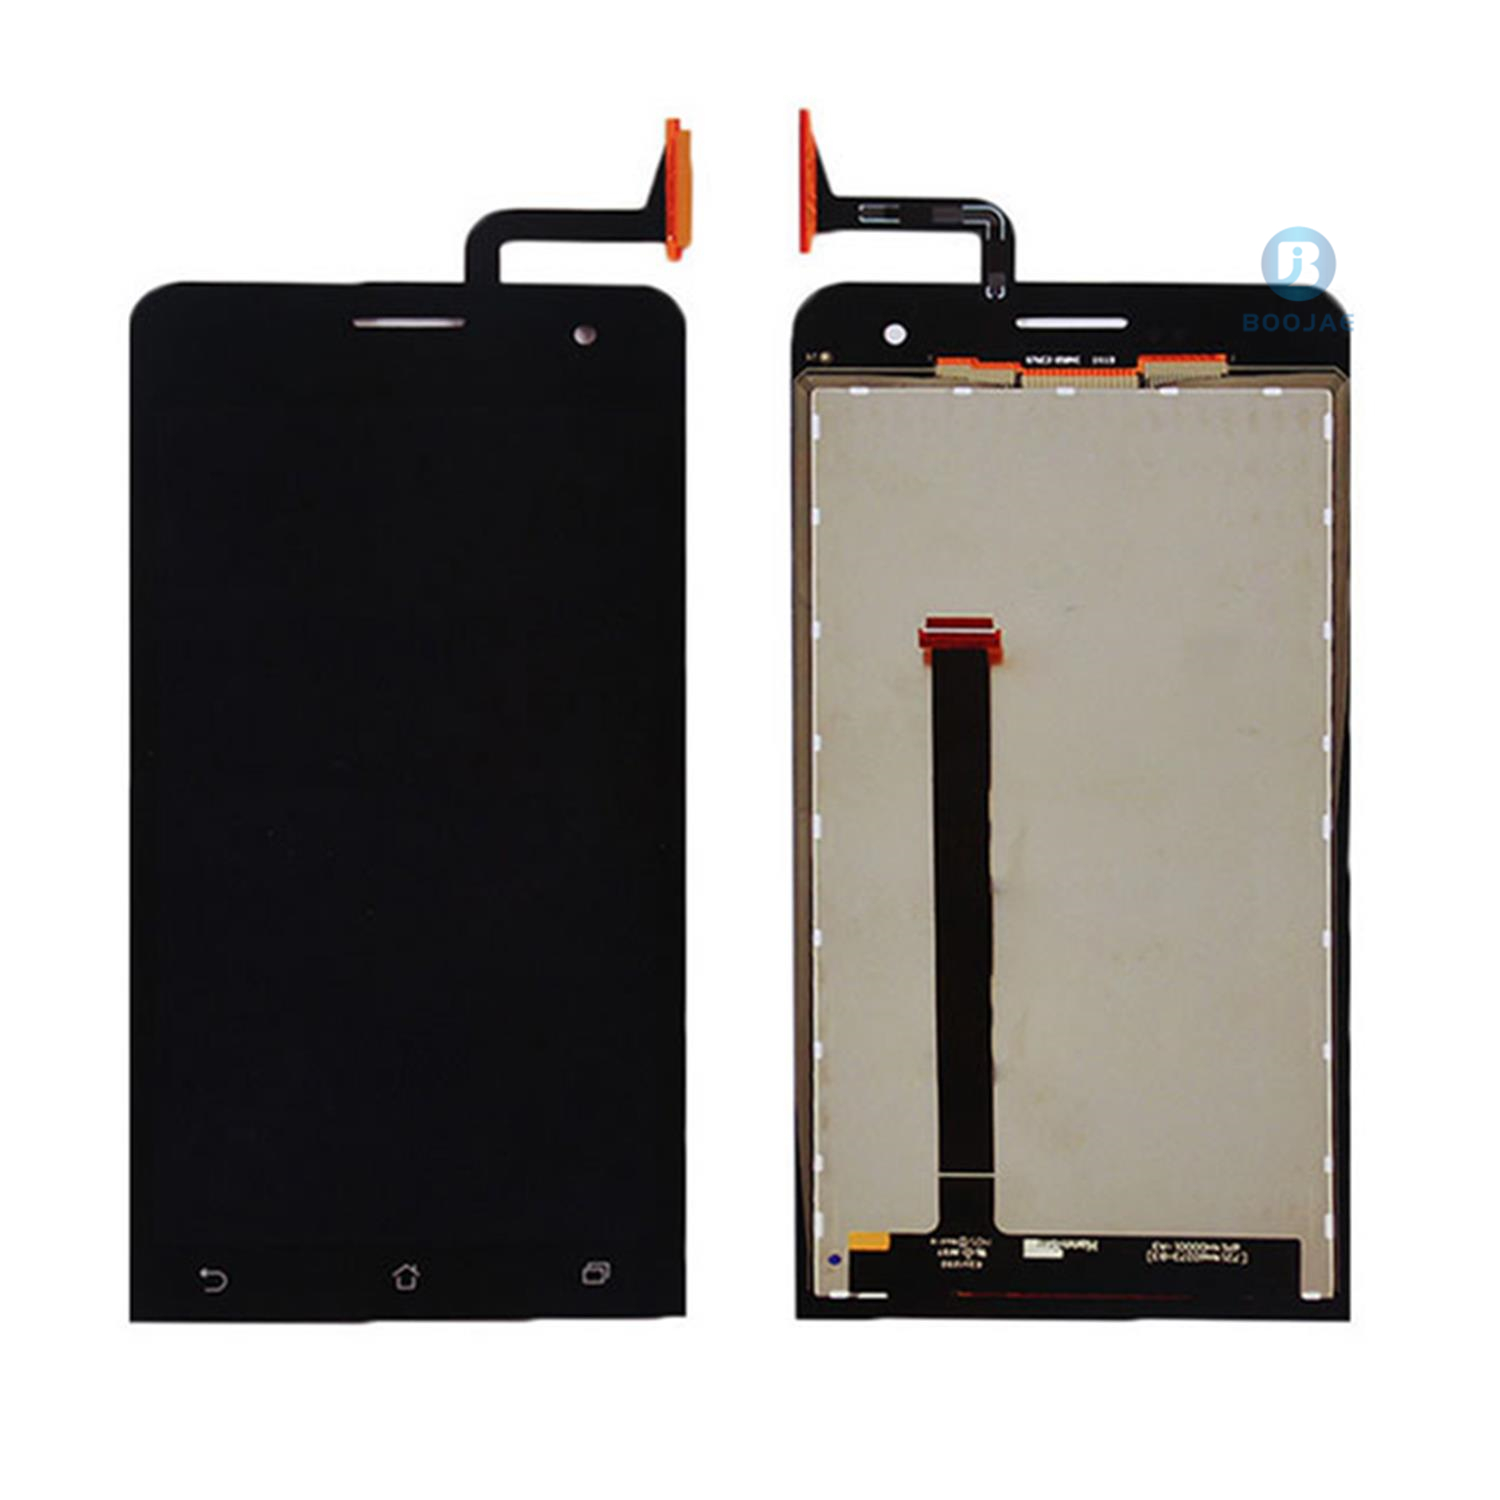 For Asus Zenfone A500CG LCD Screen Display and Touch Panel Digitizer Assembly Replacement